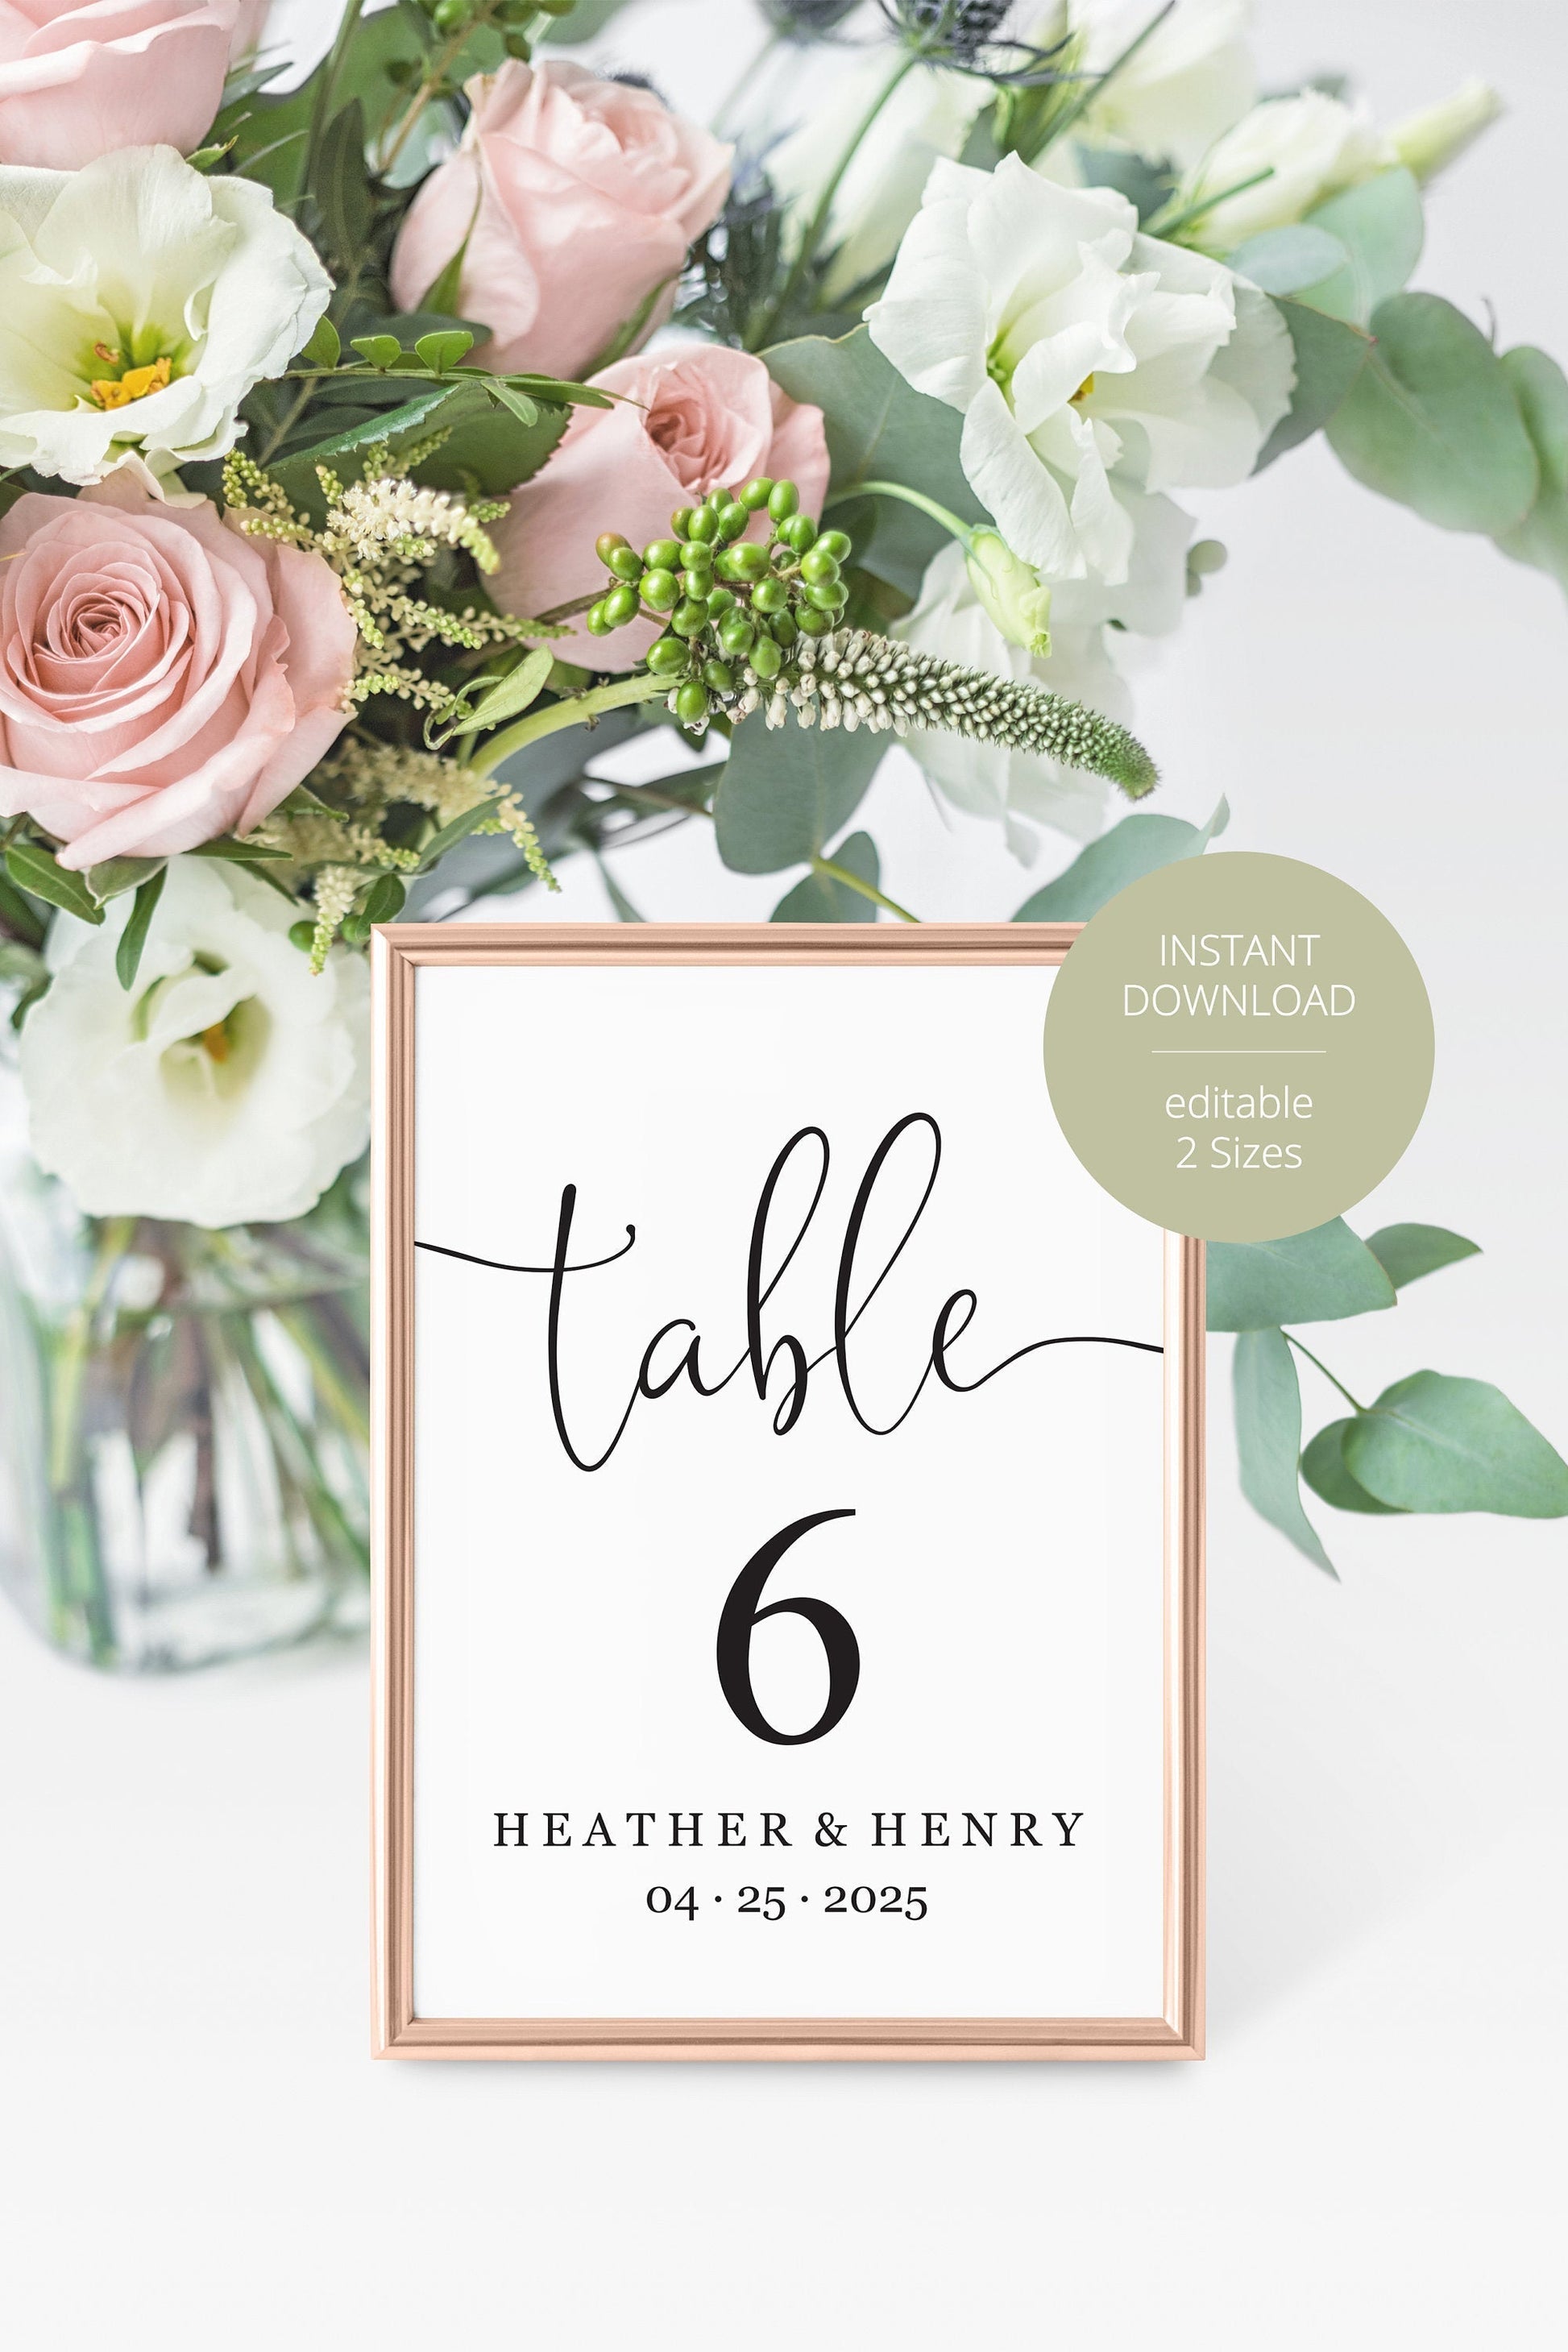 Simple Wedding Table Number, Wedding Table Printable Numbers Instant Download, DIY Table Numbers Cards, Calligraphy Rustic  -Heather  SAVVY PAPER CO